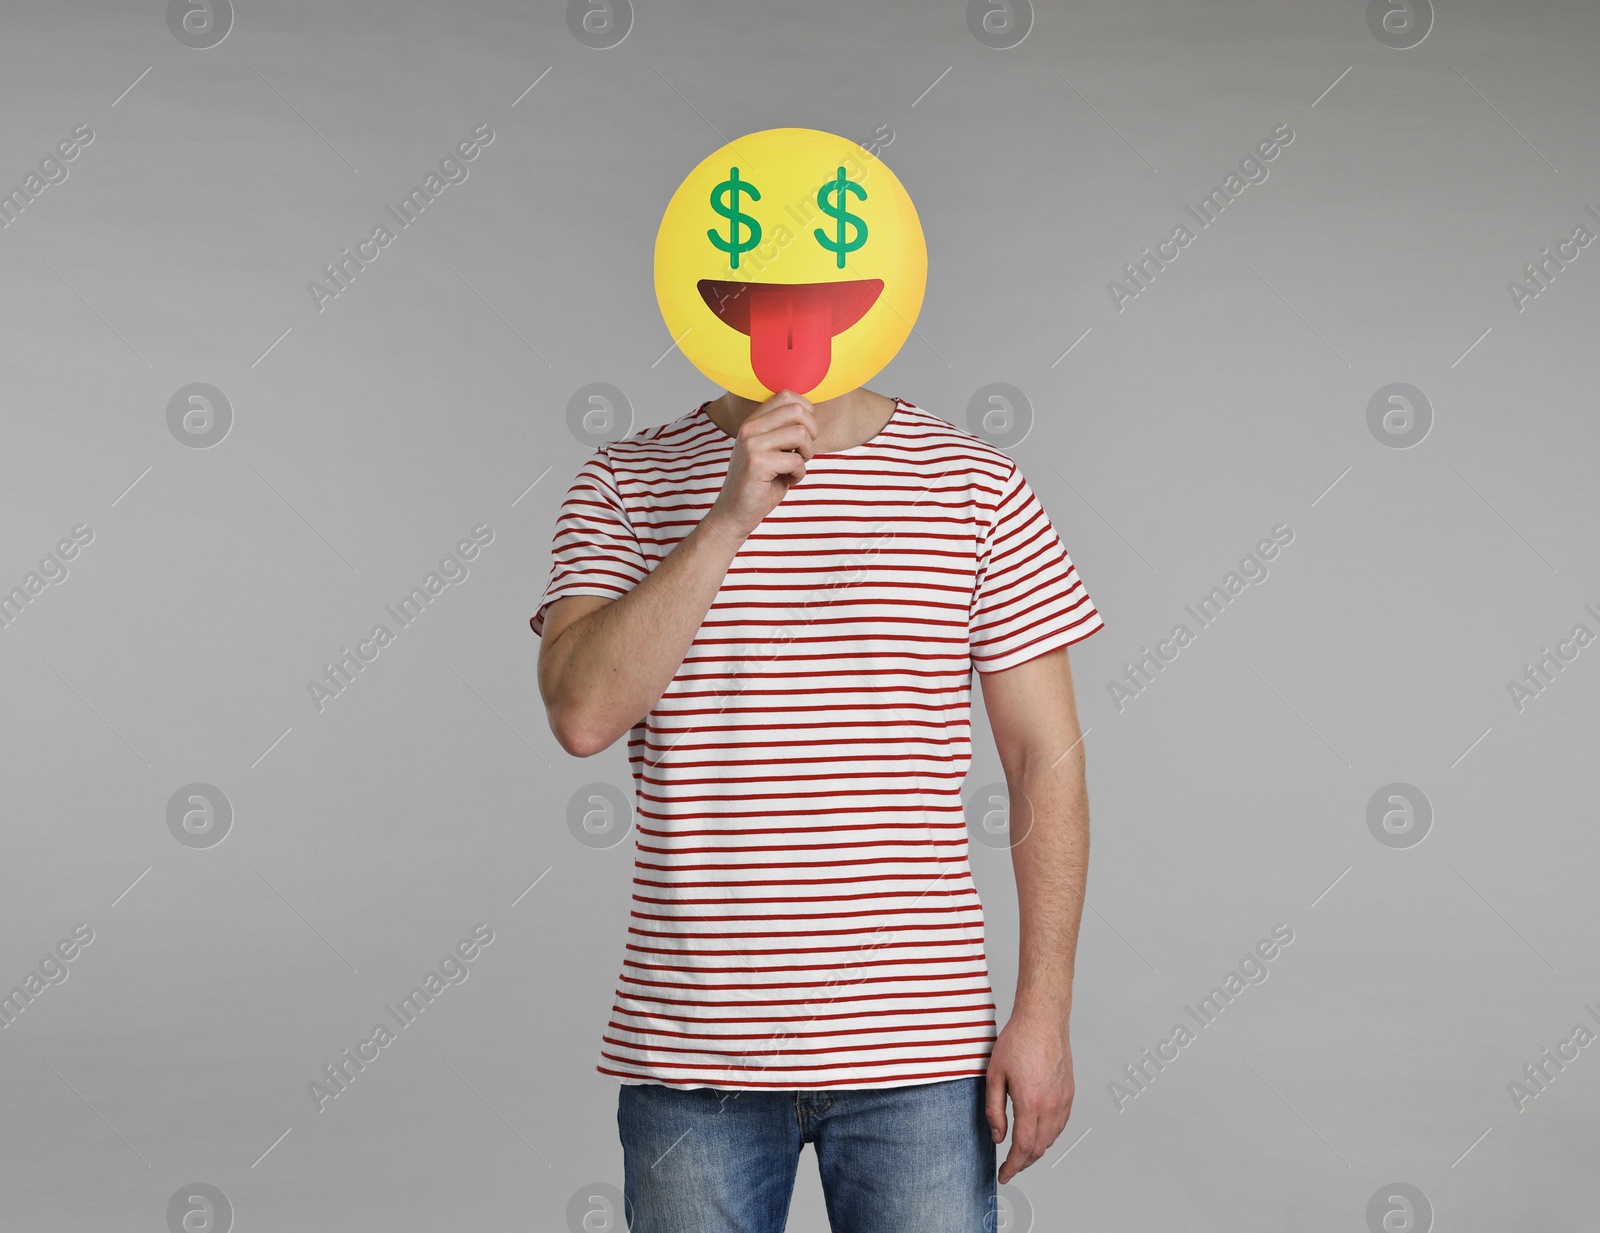 Photo of Man holding emoticon with dollar signs instead of eyes on grey background